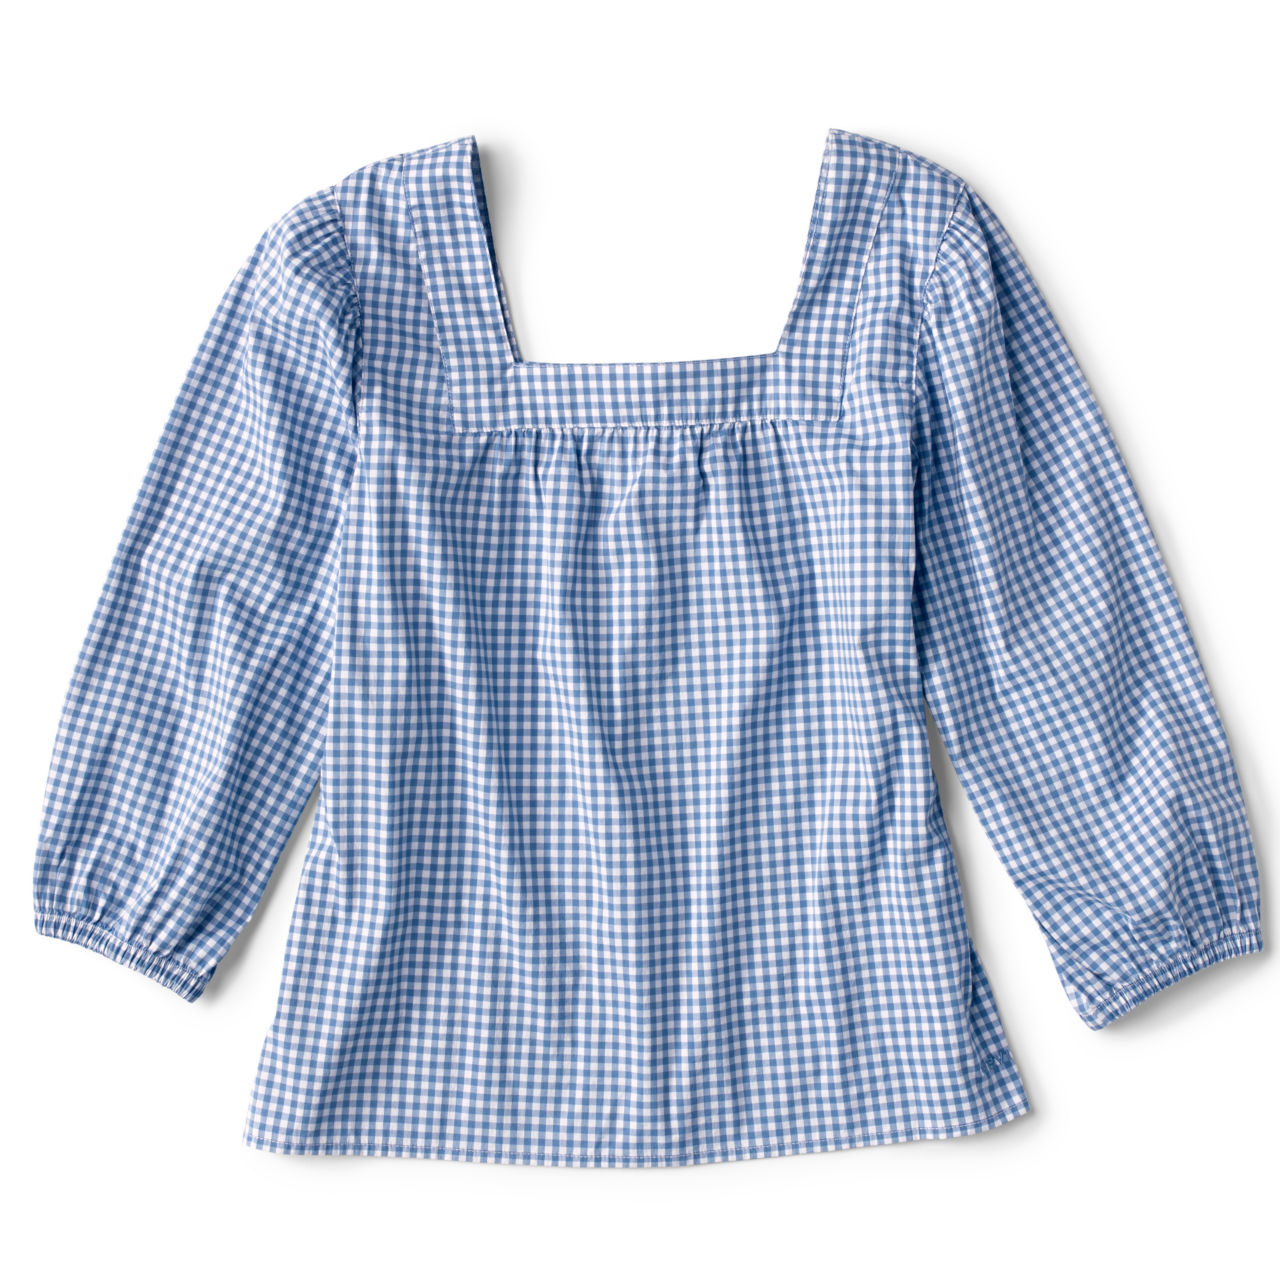 River Guide Square-Necked Popover - DUSTY BLUE CHECK image number 2